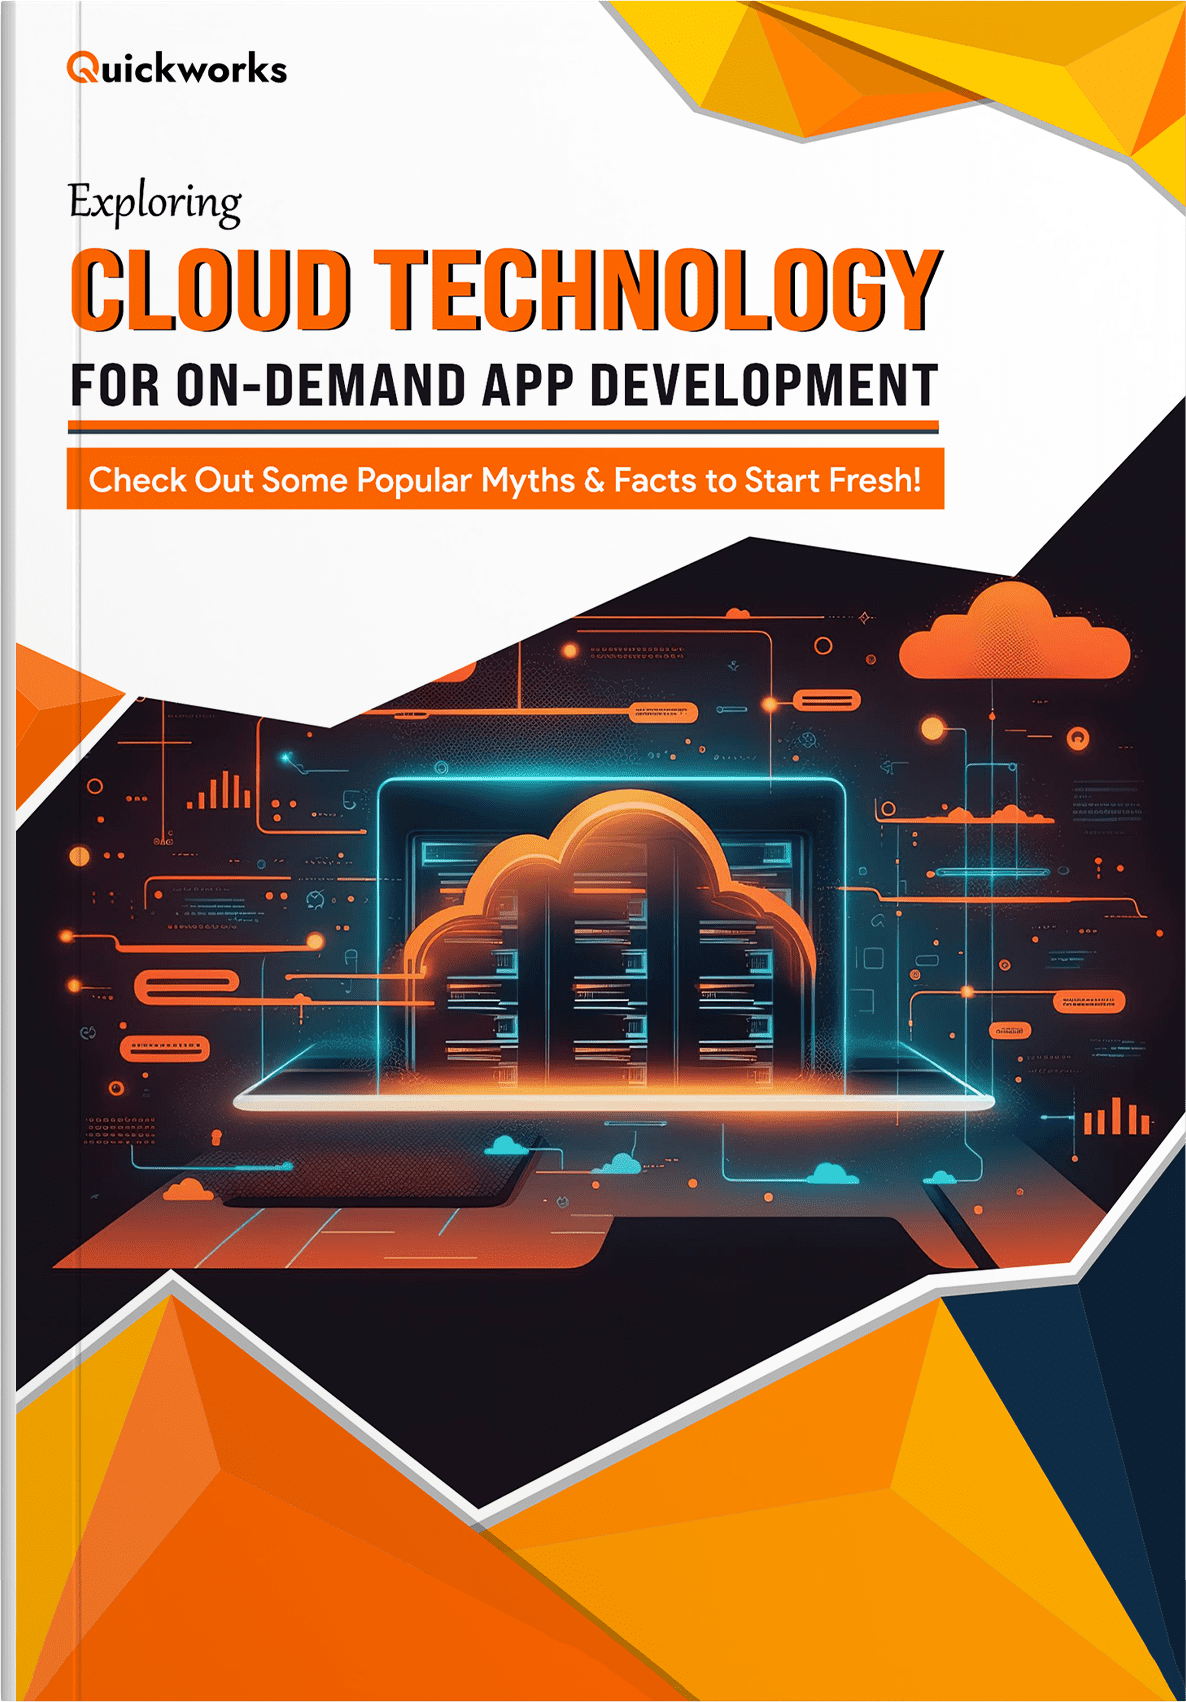 Exploring Cloud Technology for On-Demand App